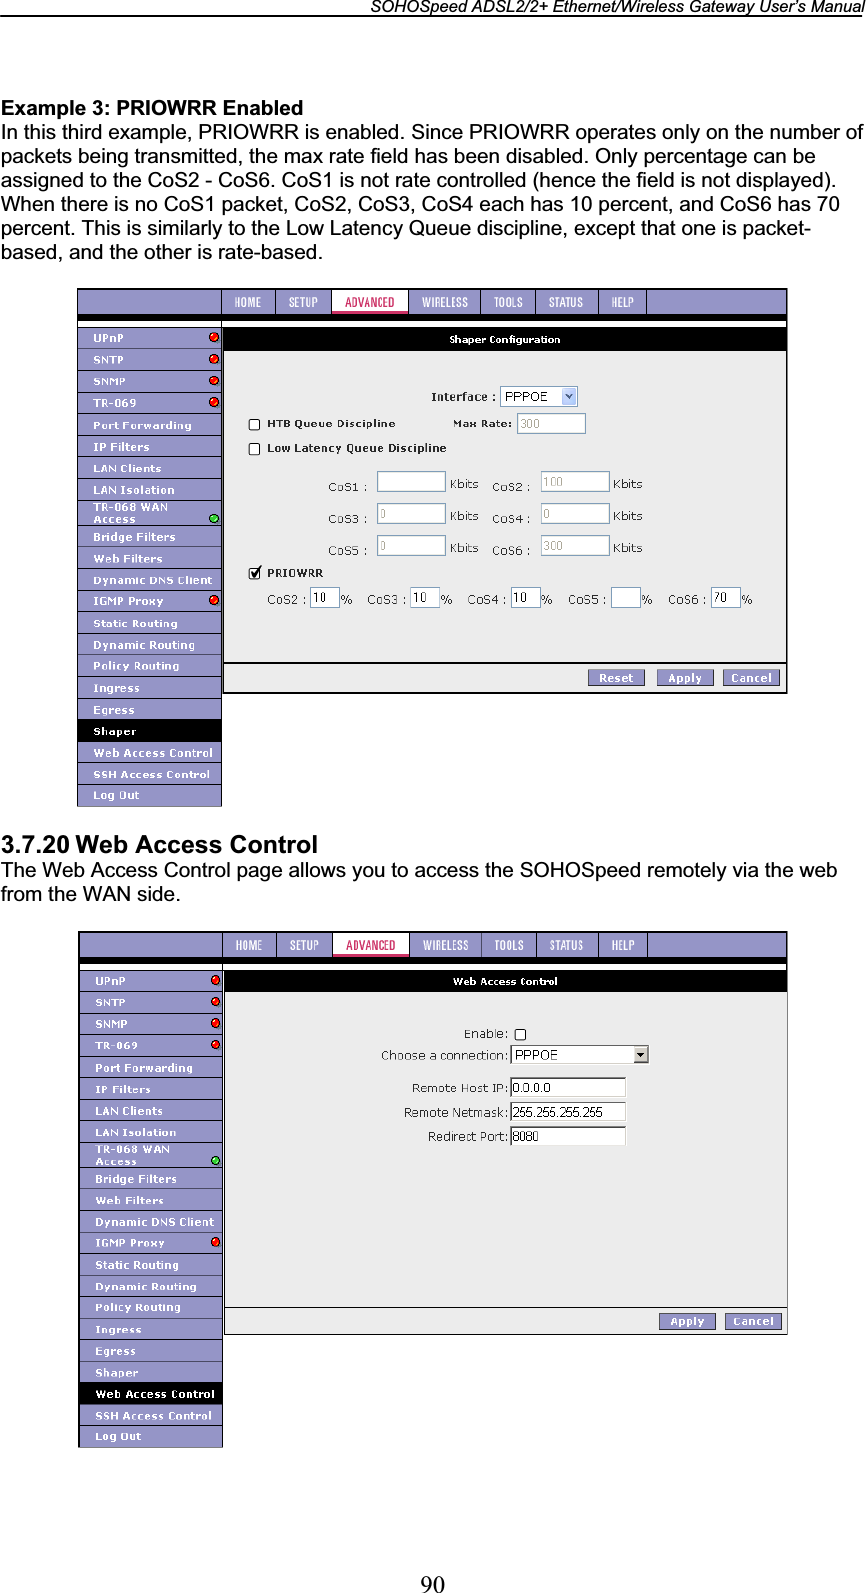 SOHOSpeed ADSL2/2+ Ethernet/Wireless Gateway User’s Manual 90Example 3: PRIOWRR Enabled In this third example, PRIOWRR is enabled. Since PRIOWRR operates only on the number of packets being transmitted, the max rate field has been disabled. Only percentage can be assigned to the CoS2 - CoS6. CoS1 is not rate controlled (hence the field is not displayed). When there is no CoS1 packet, CoS2, CoS3, CoS4 each has 10 percent, and CoS6 has 70 percent. This is similarly to the Low Latency Queue discipline, except that one is packet-based, and the other is rate-based. 3.7.20 Web Access Control The Web Access Control page allows you to access the SOHOSpeed remotely via the web from the WAN side. 